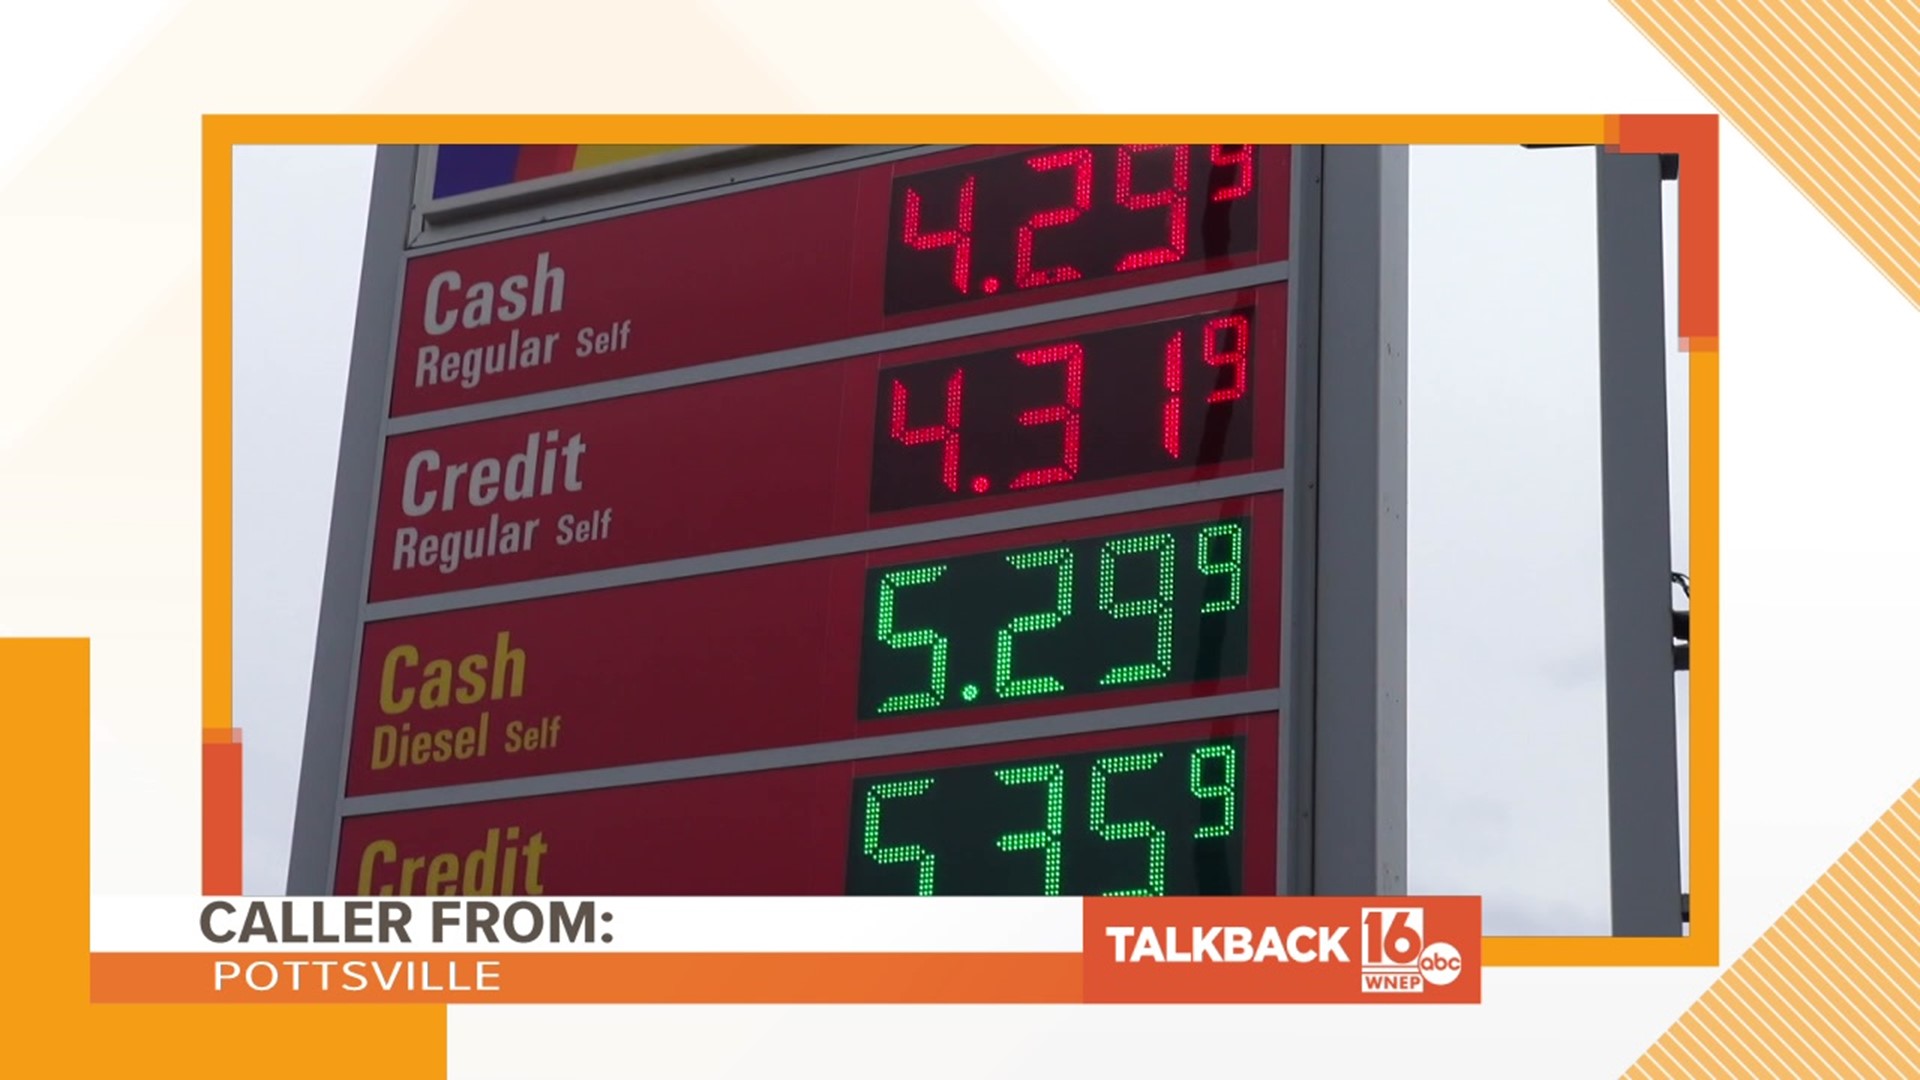 Callers have some suggestions on how to save money as gas prices continue to rise.